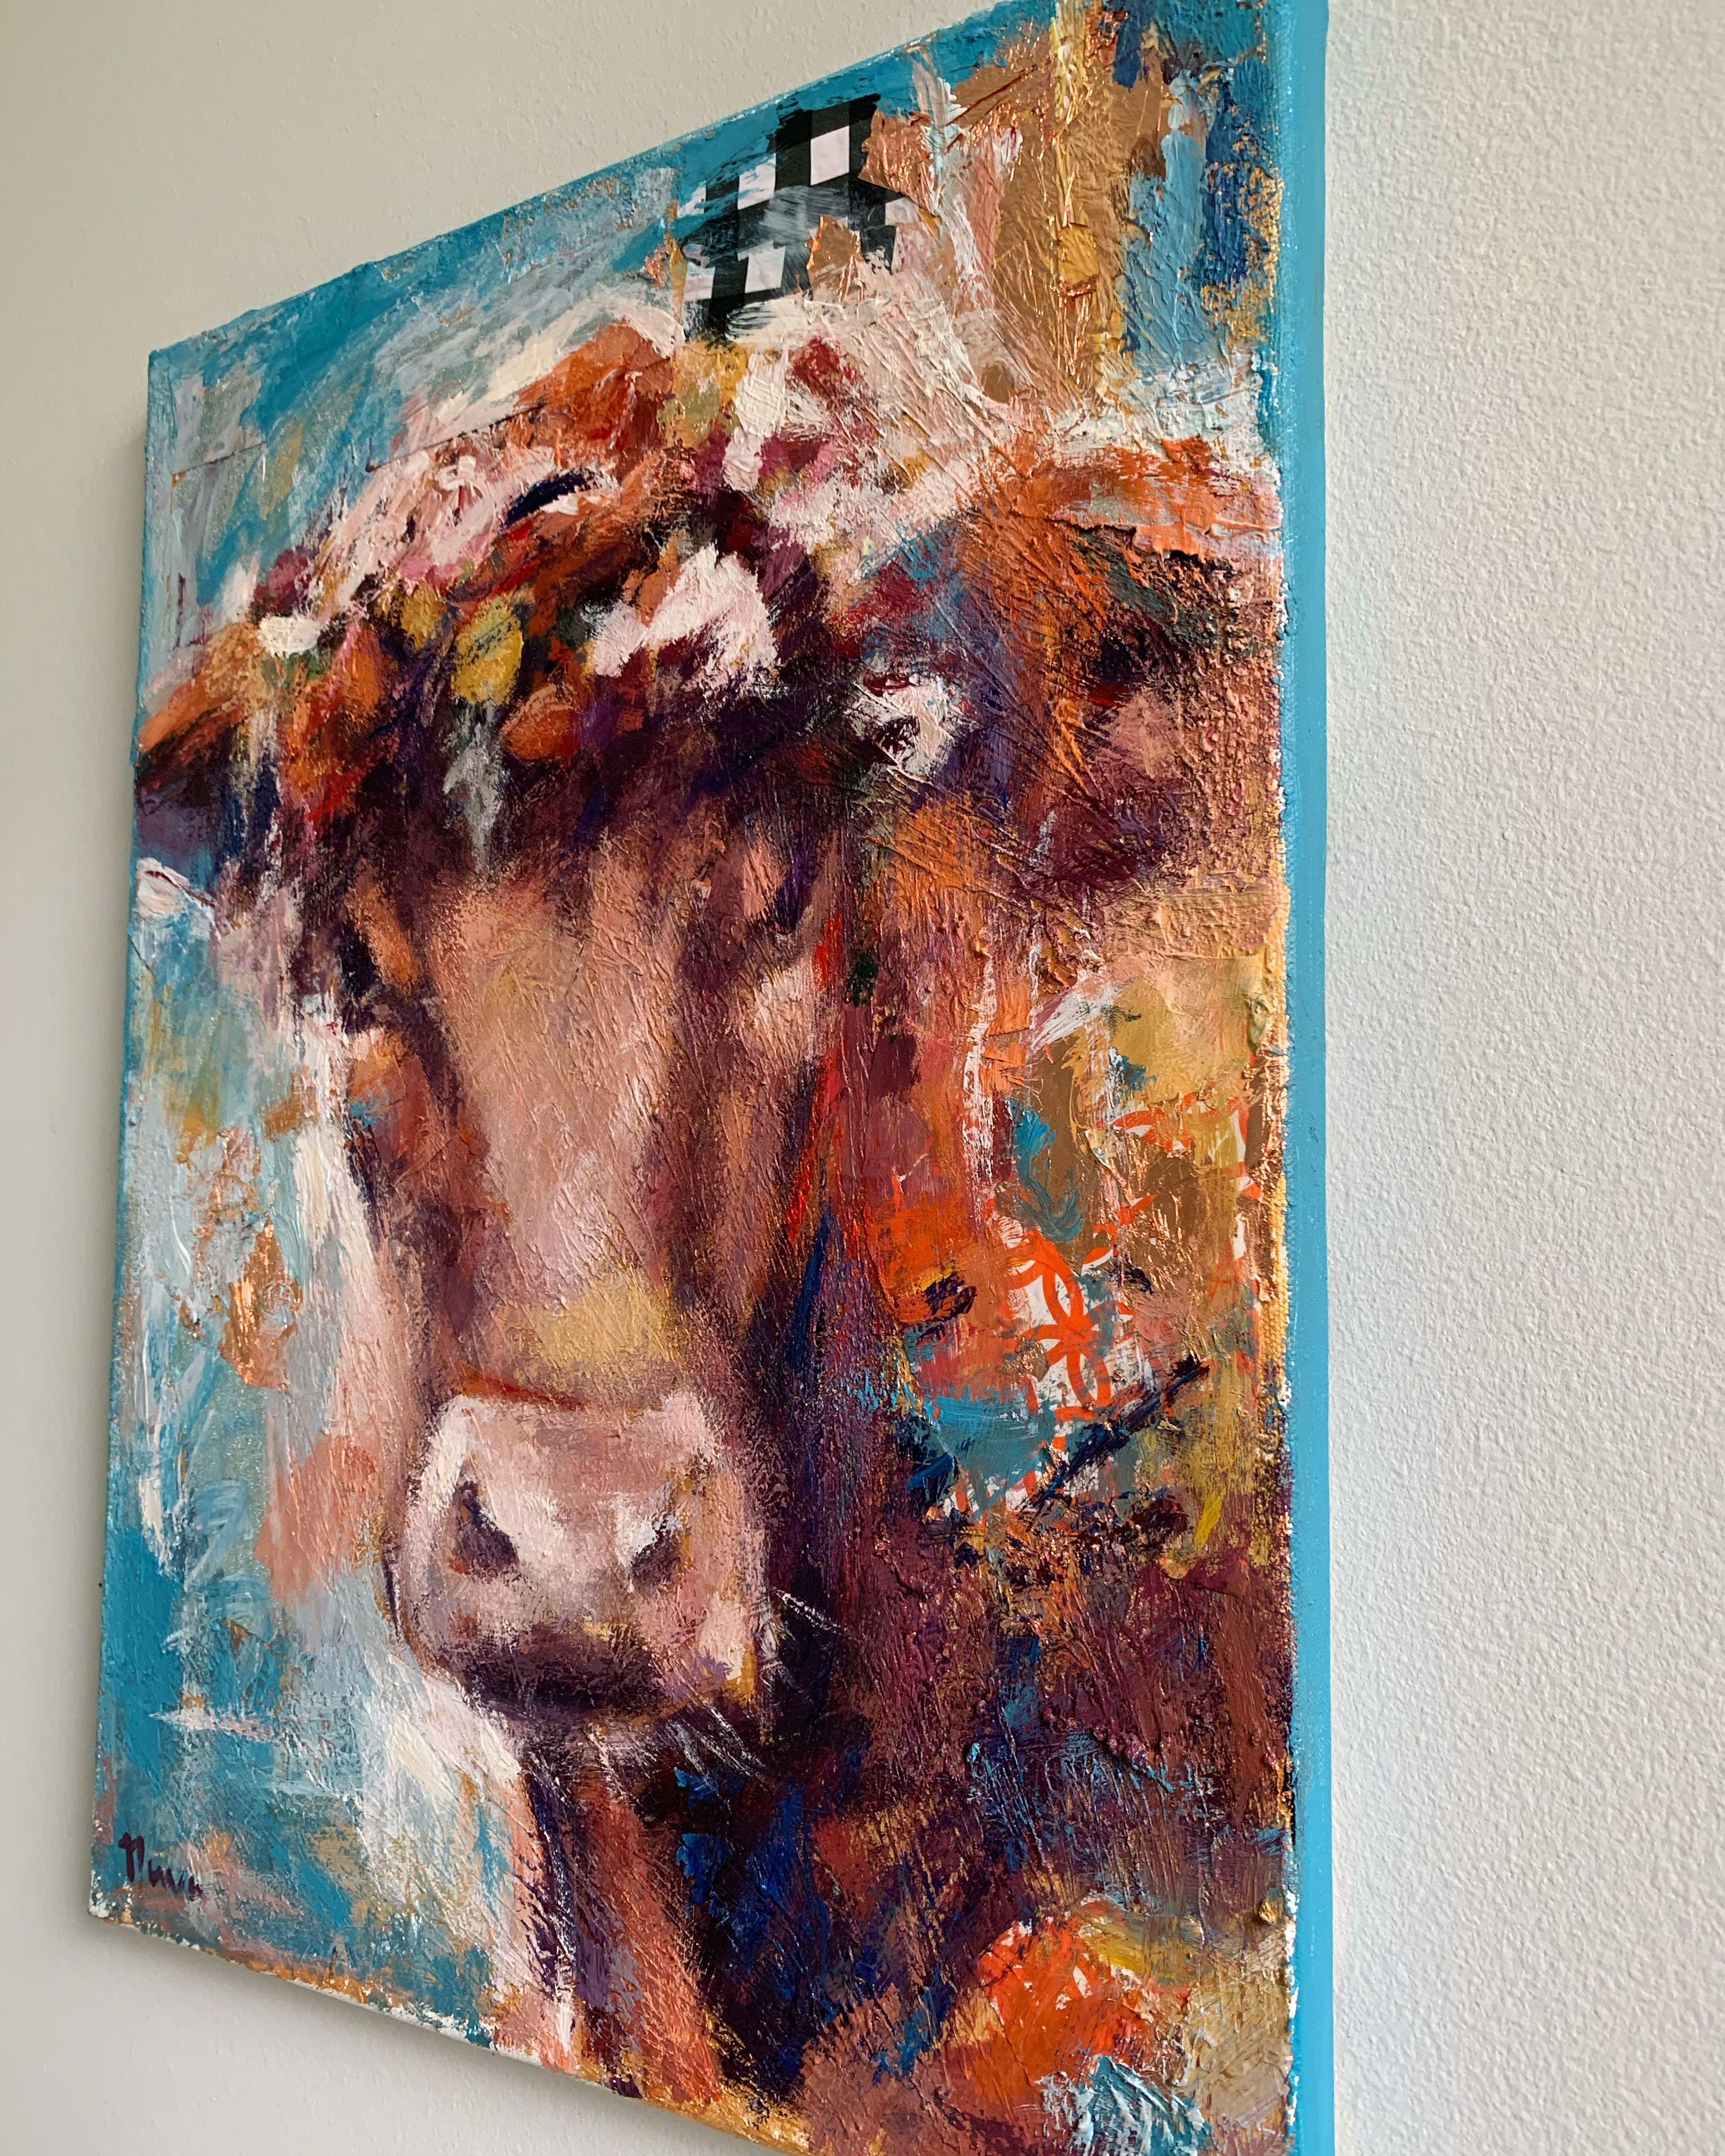 This playful and joyful interpretative painting of Lucy the cow is loaded with color, texture, and pattern heightening the effect of the piece. :: Painting :: Contemporary :: This piece comes with an official certificate of authenticity signed by